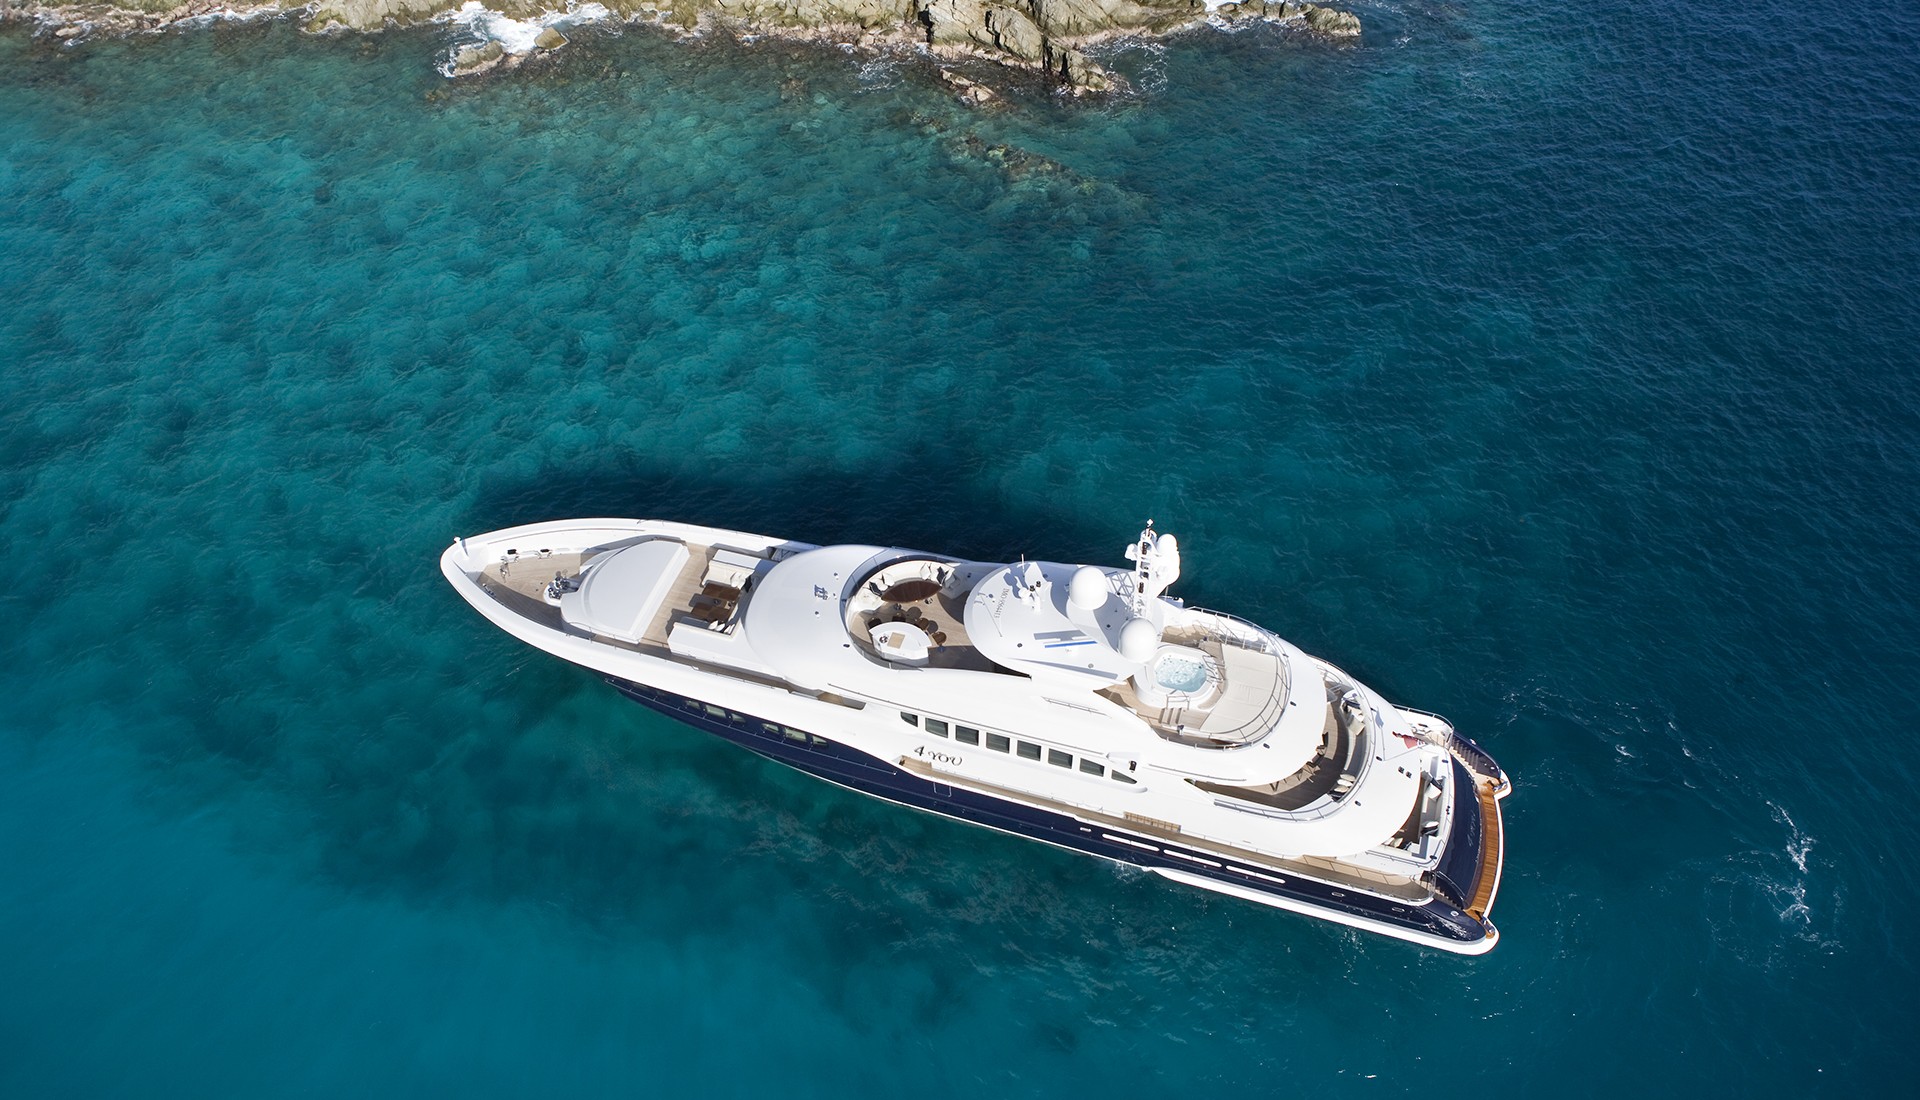 Yacht YOU & ME By Heesen - Profile From Above